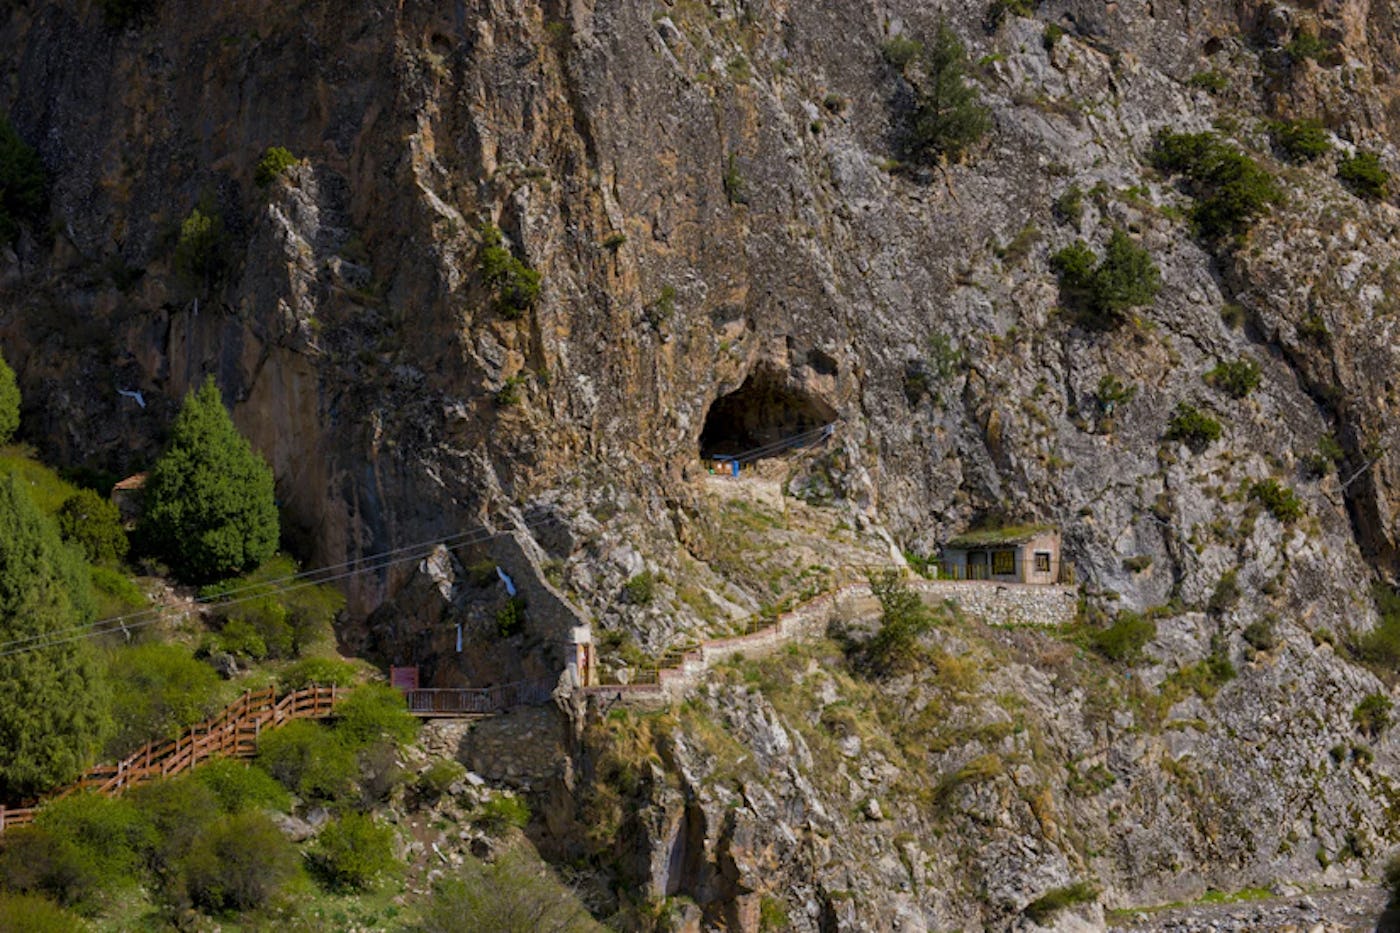 A mountainous landscape with a rugged cliff face featuring a small cave, a wooden pathway, and a tiny stone building surrounded by greenery.